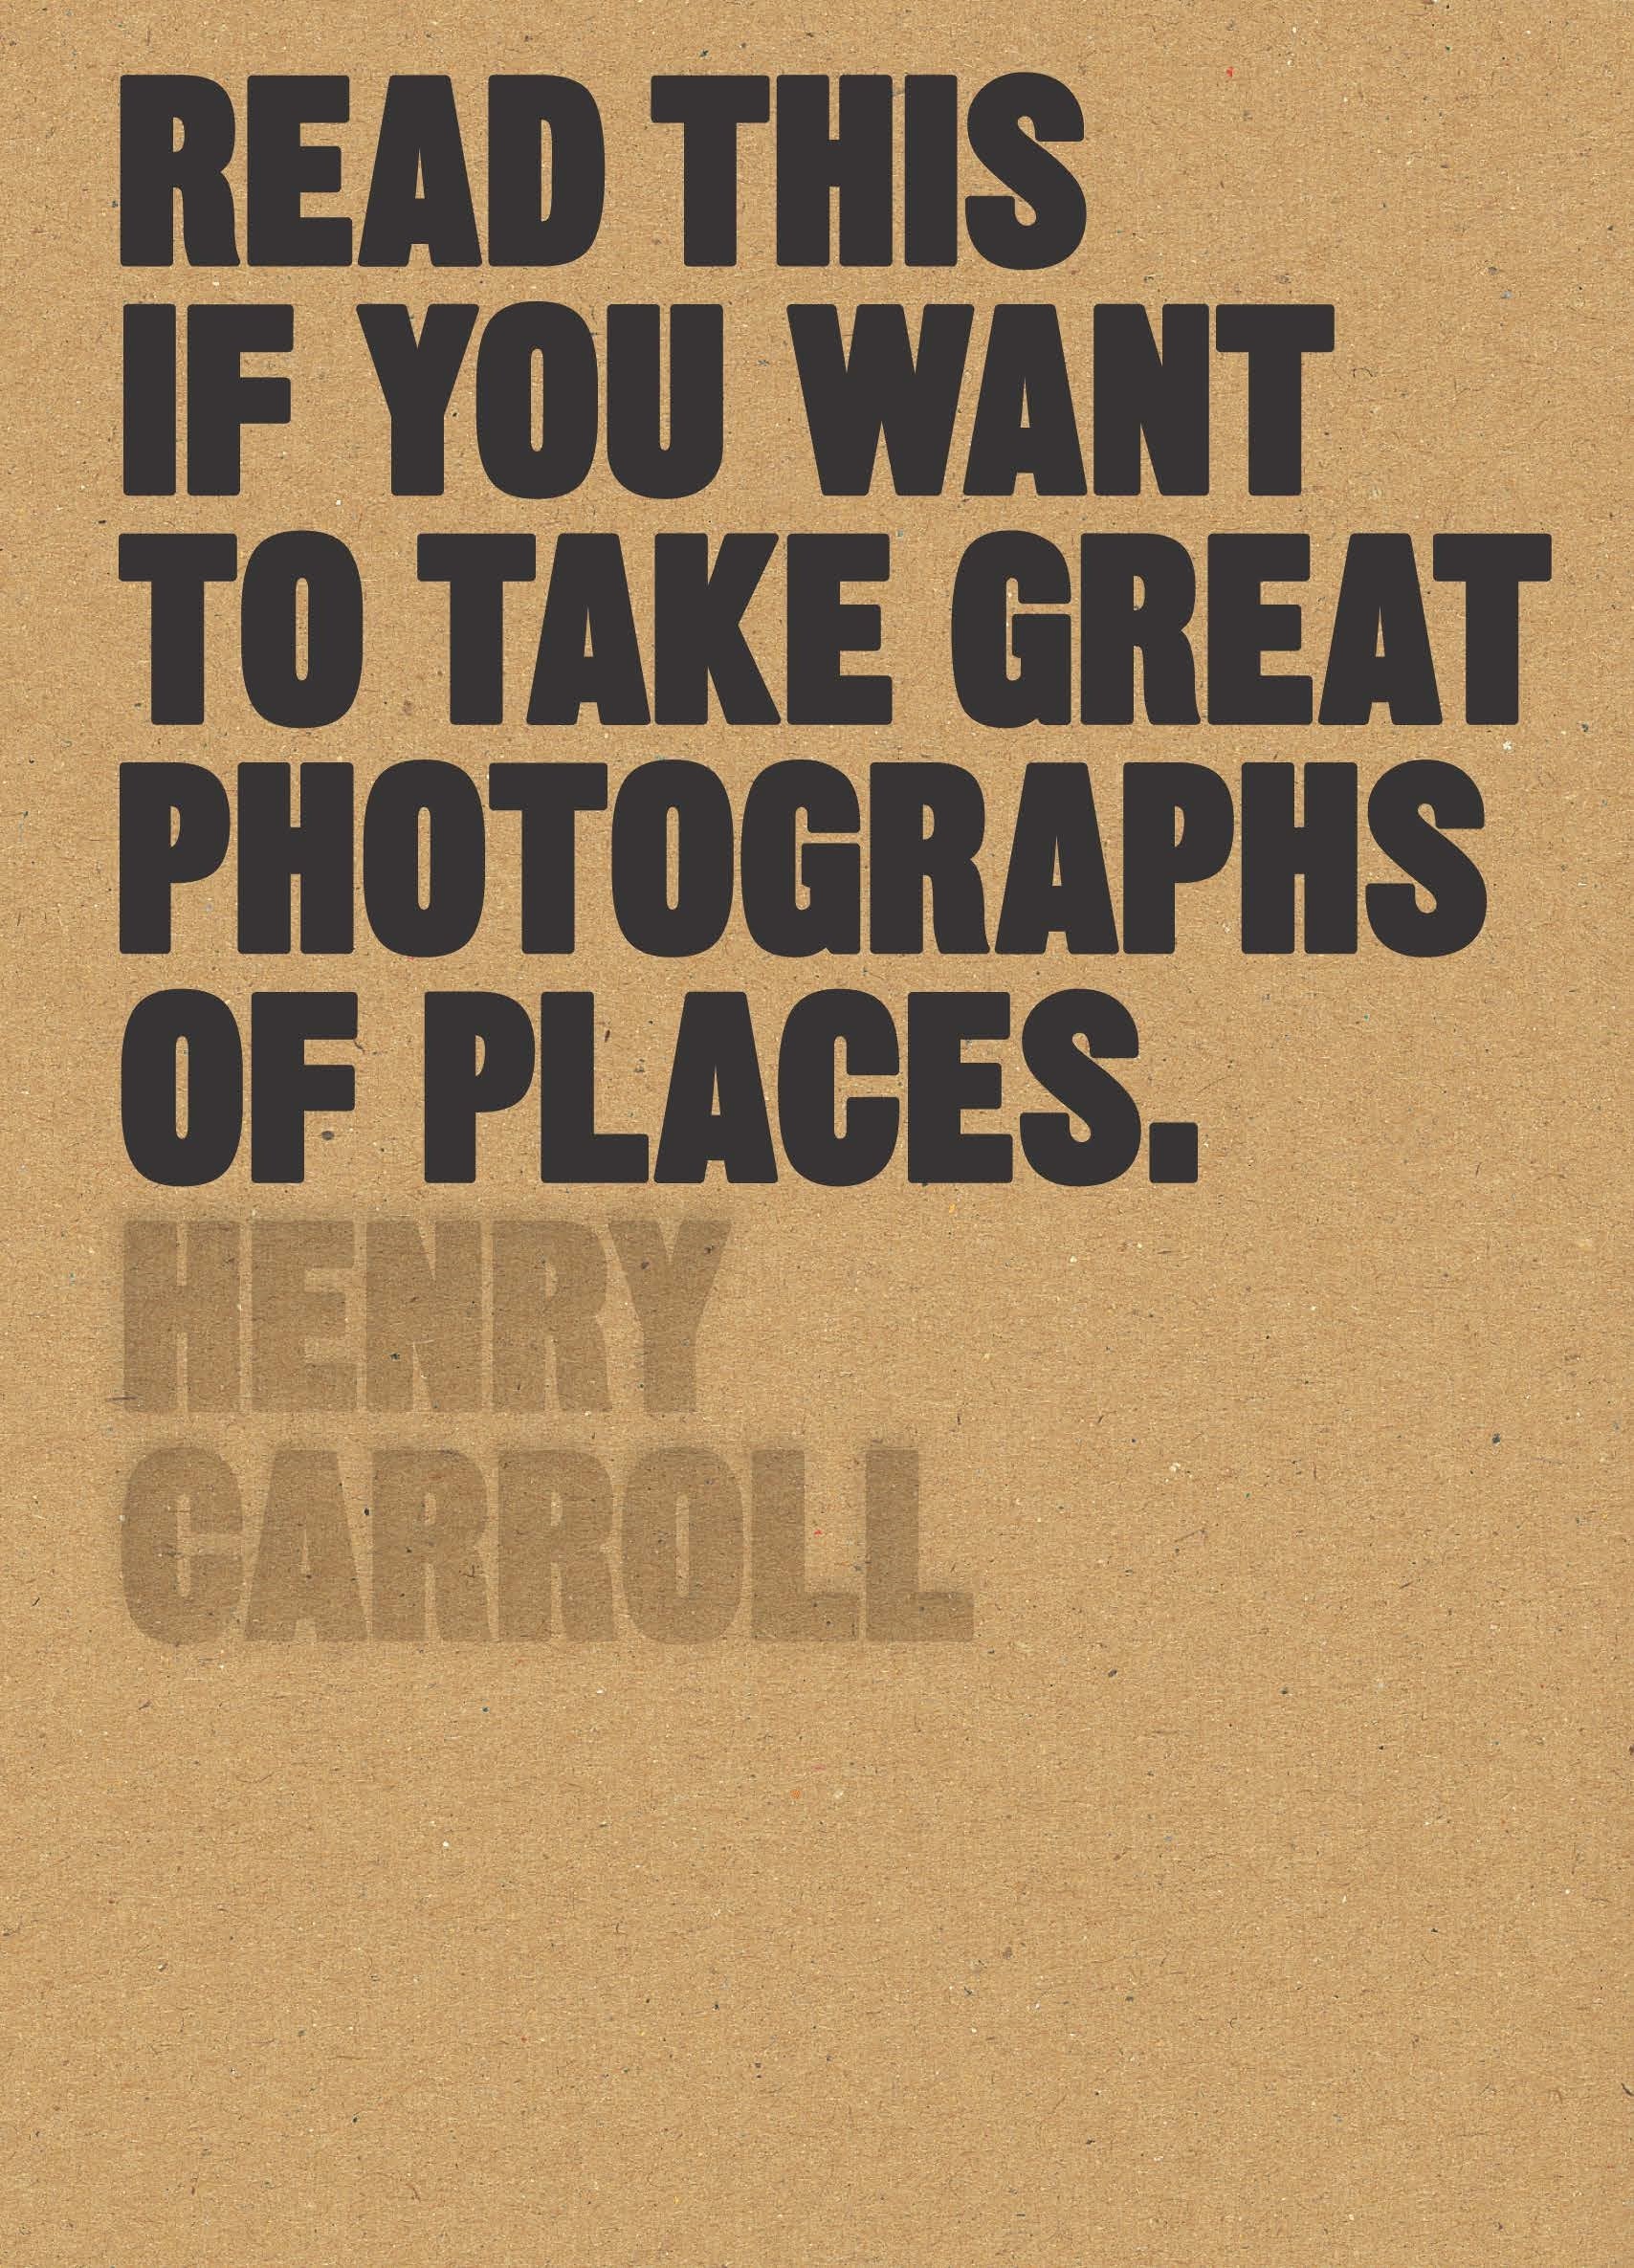 Read This if You Want to Take Great Photographs of Places by Henry Carroll